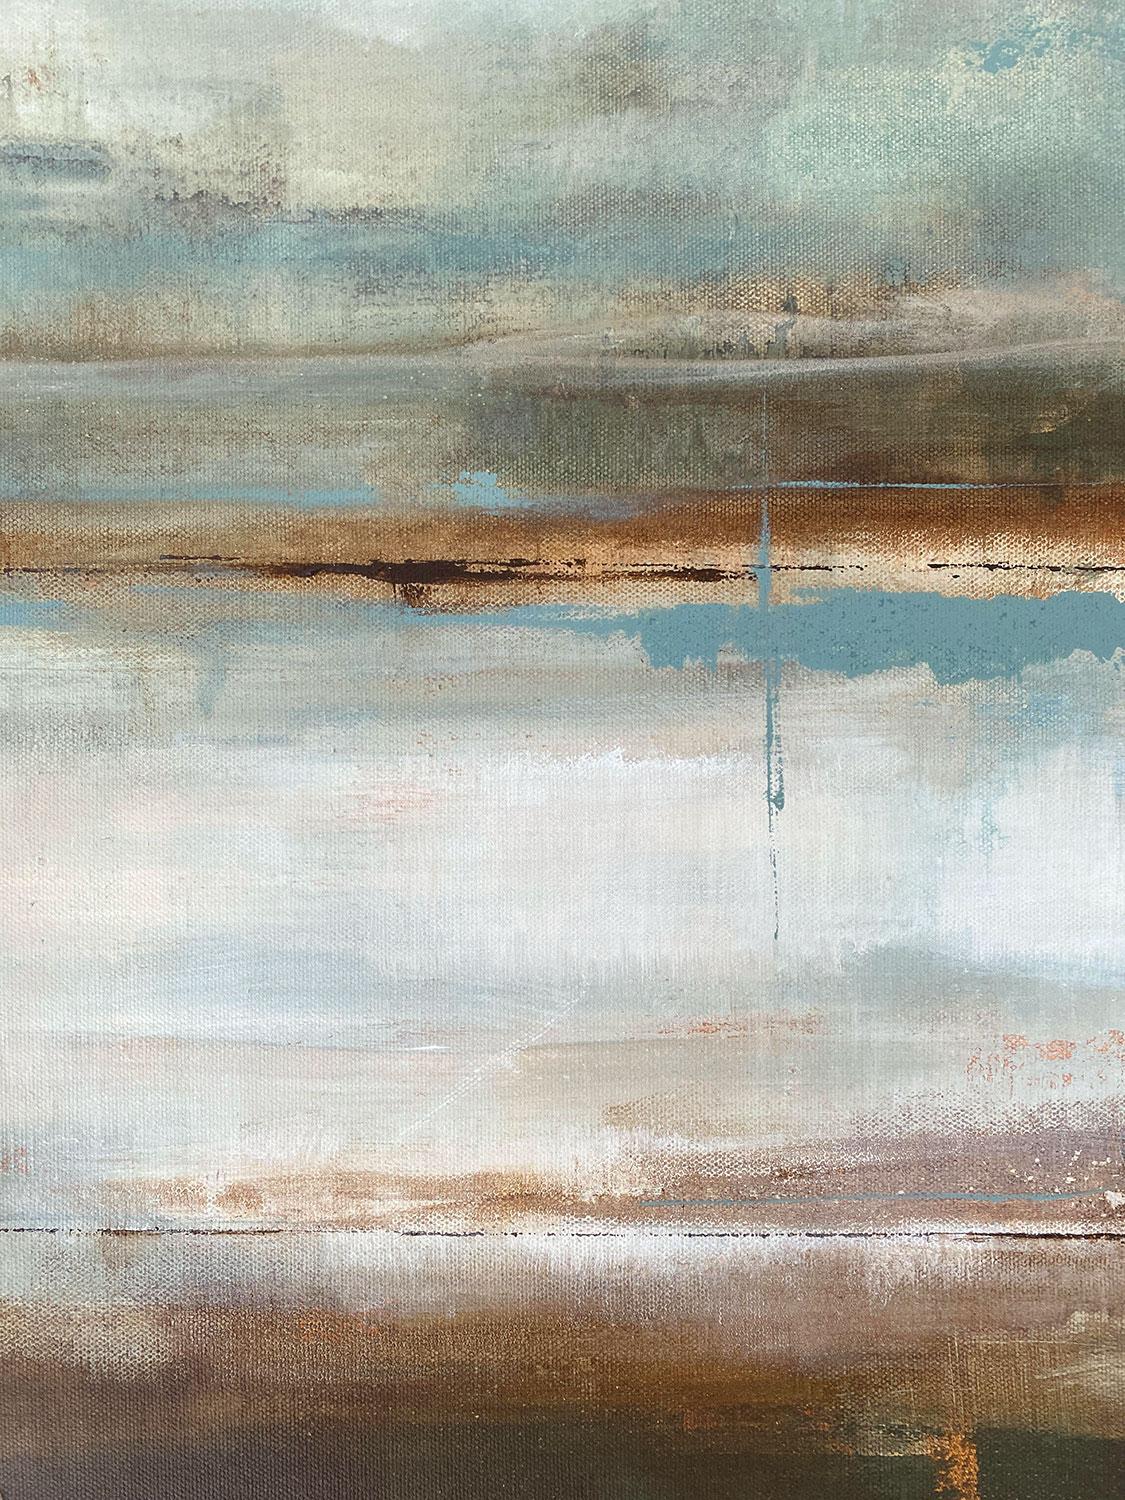 <p>Artist Comments<br>Artist Drew Noel Marin paints an ethereal abstract of land meeting ocean. A rustic representation of a tranquil seaside. Drew applies loose brush strokes of powdery shades of blue. The composition evokes an atmospheric feeling